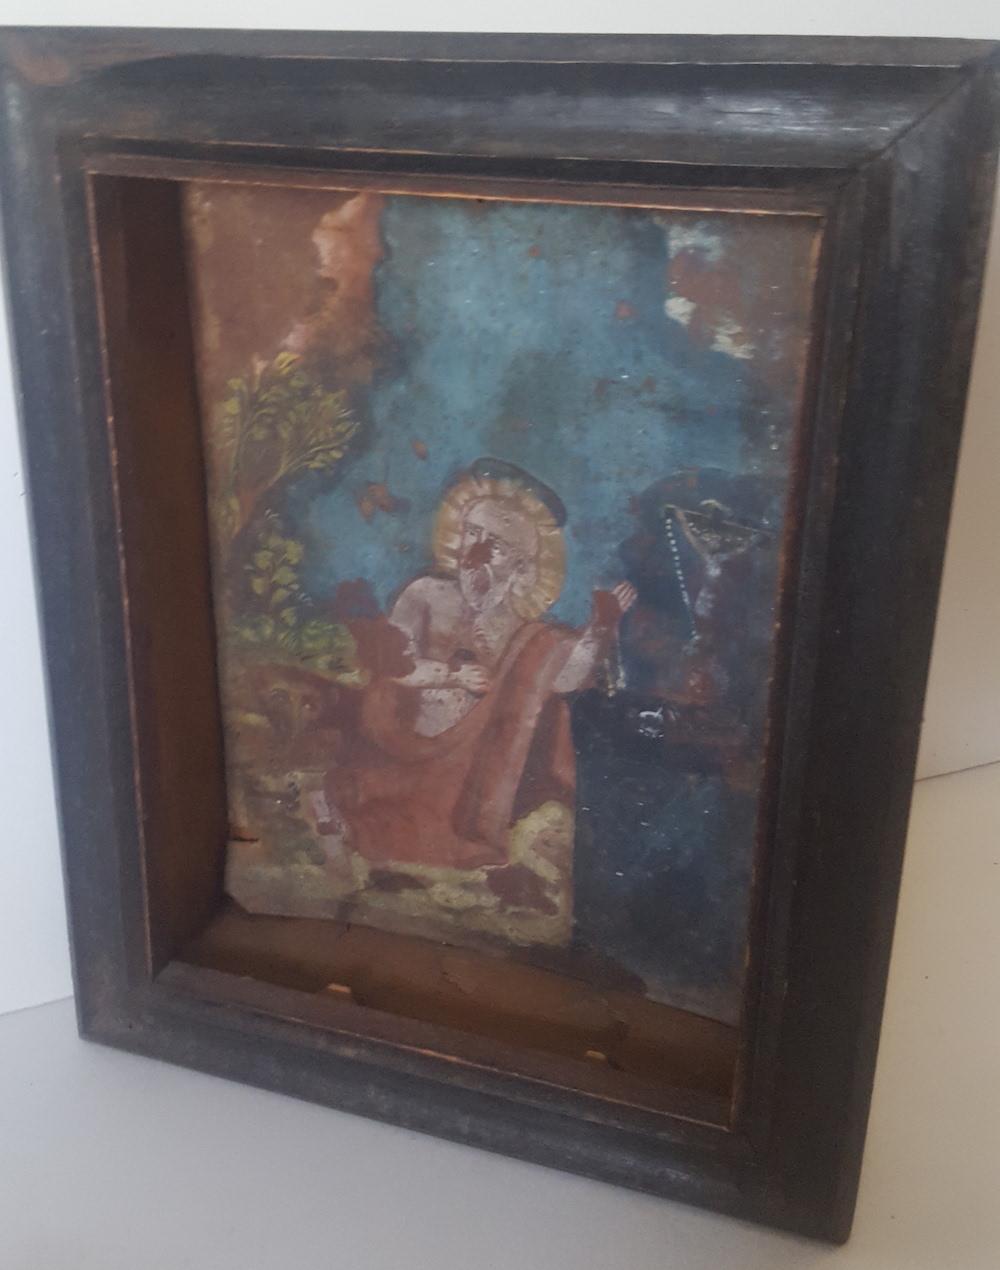 A Retablo painted on tin, in a period, wooden, black, shadowbox frame, missing its picture glass. The Retablo itself is in extremely distressed condition, missing paint, and an amount of imagery. Never the less, the subject of the work, St. Jerome,